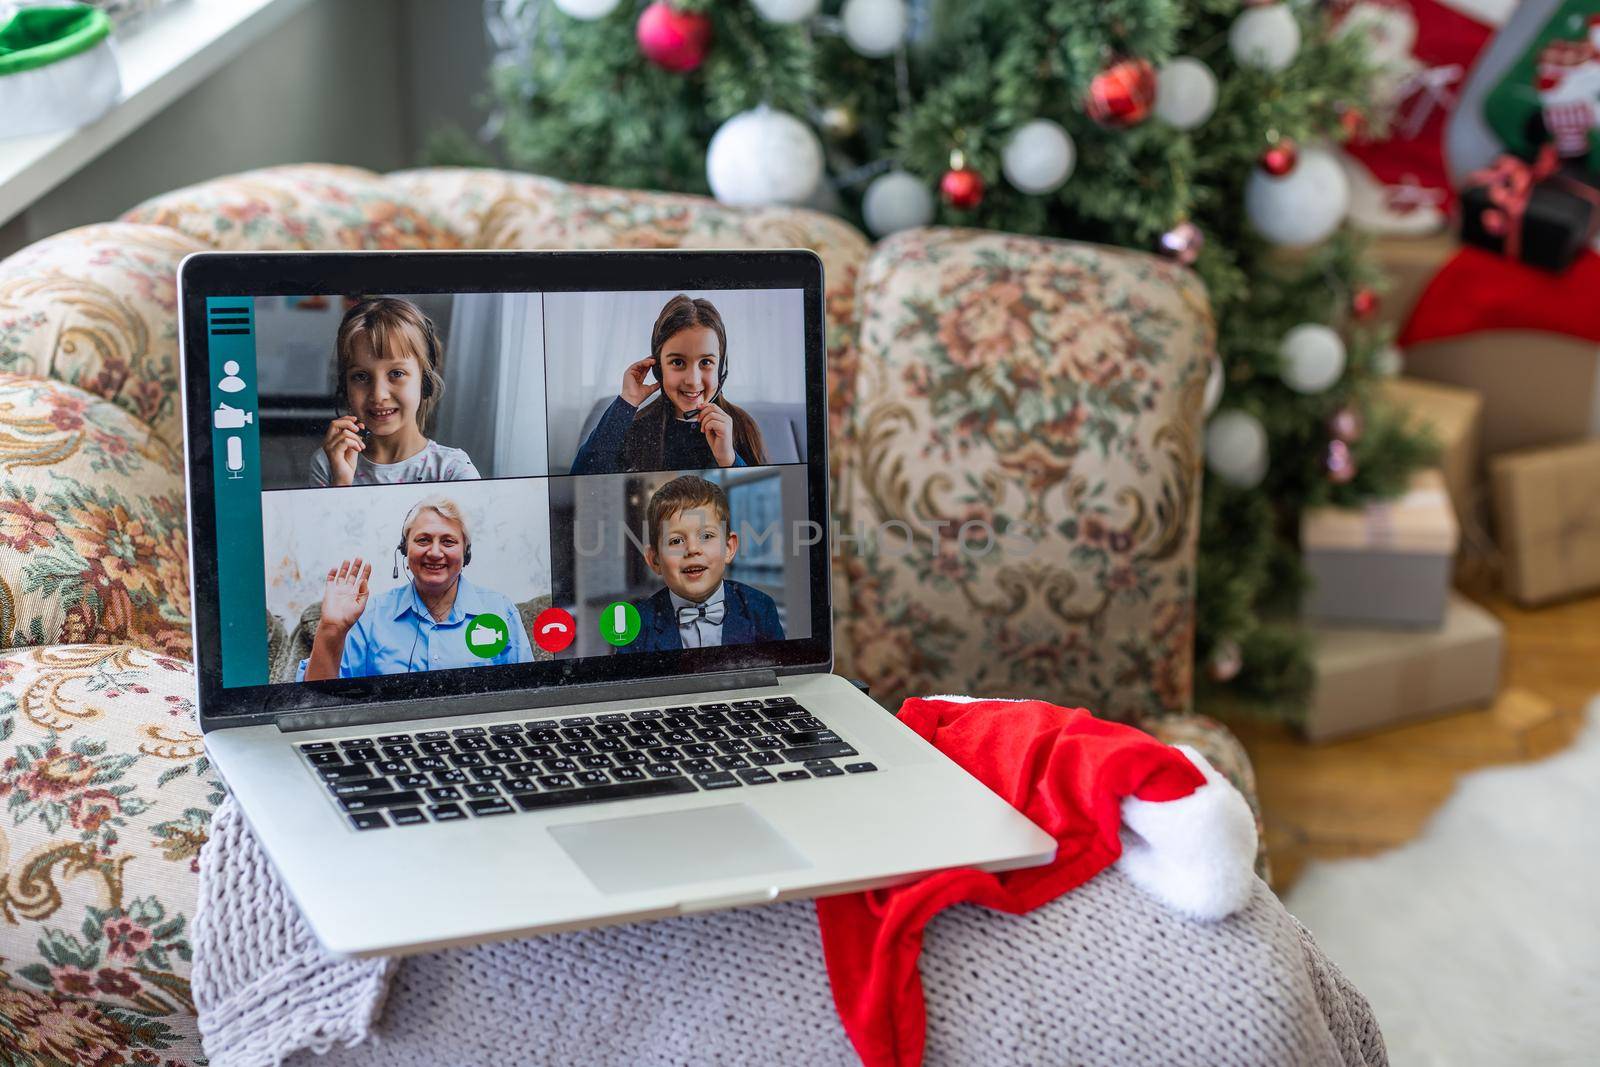 A happy family with a child is celebrating Christmas with their friends on video call using webcam. Family greeting their relatives on Christmas eve online. New normal virtual event